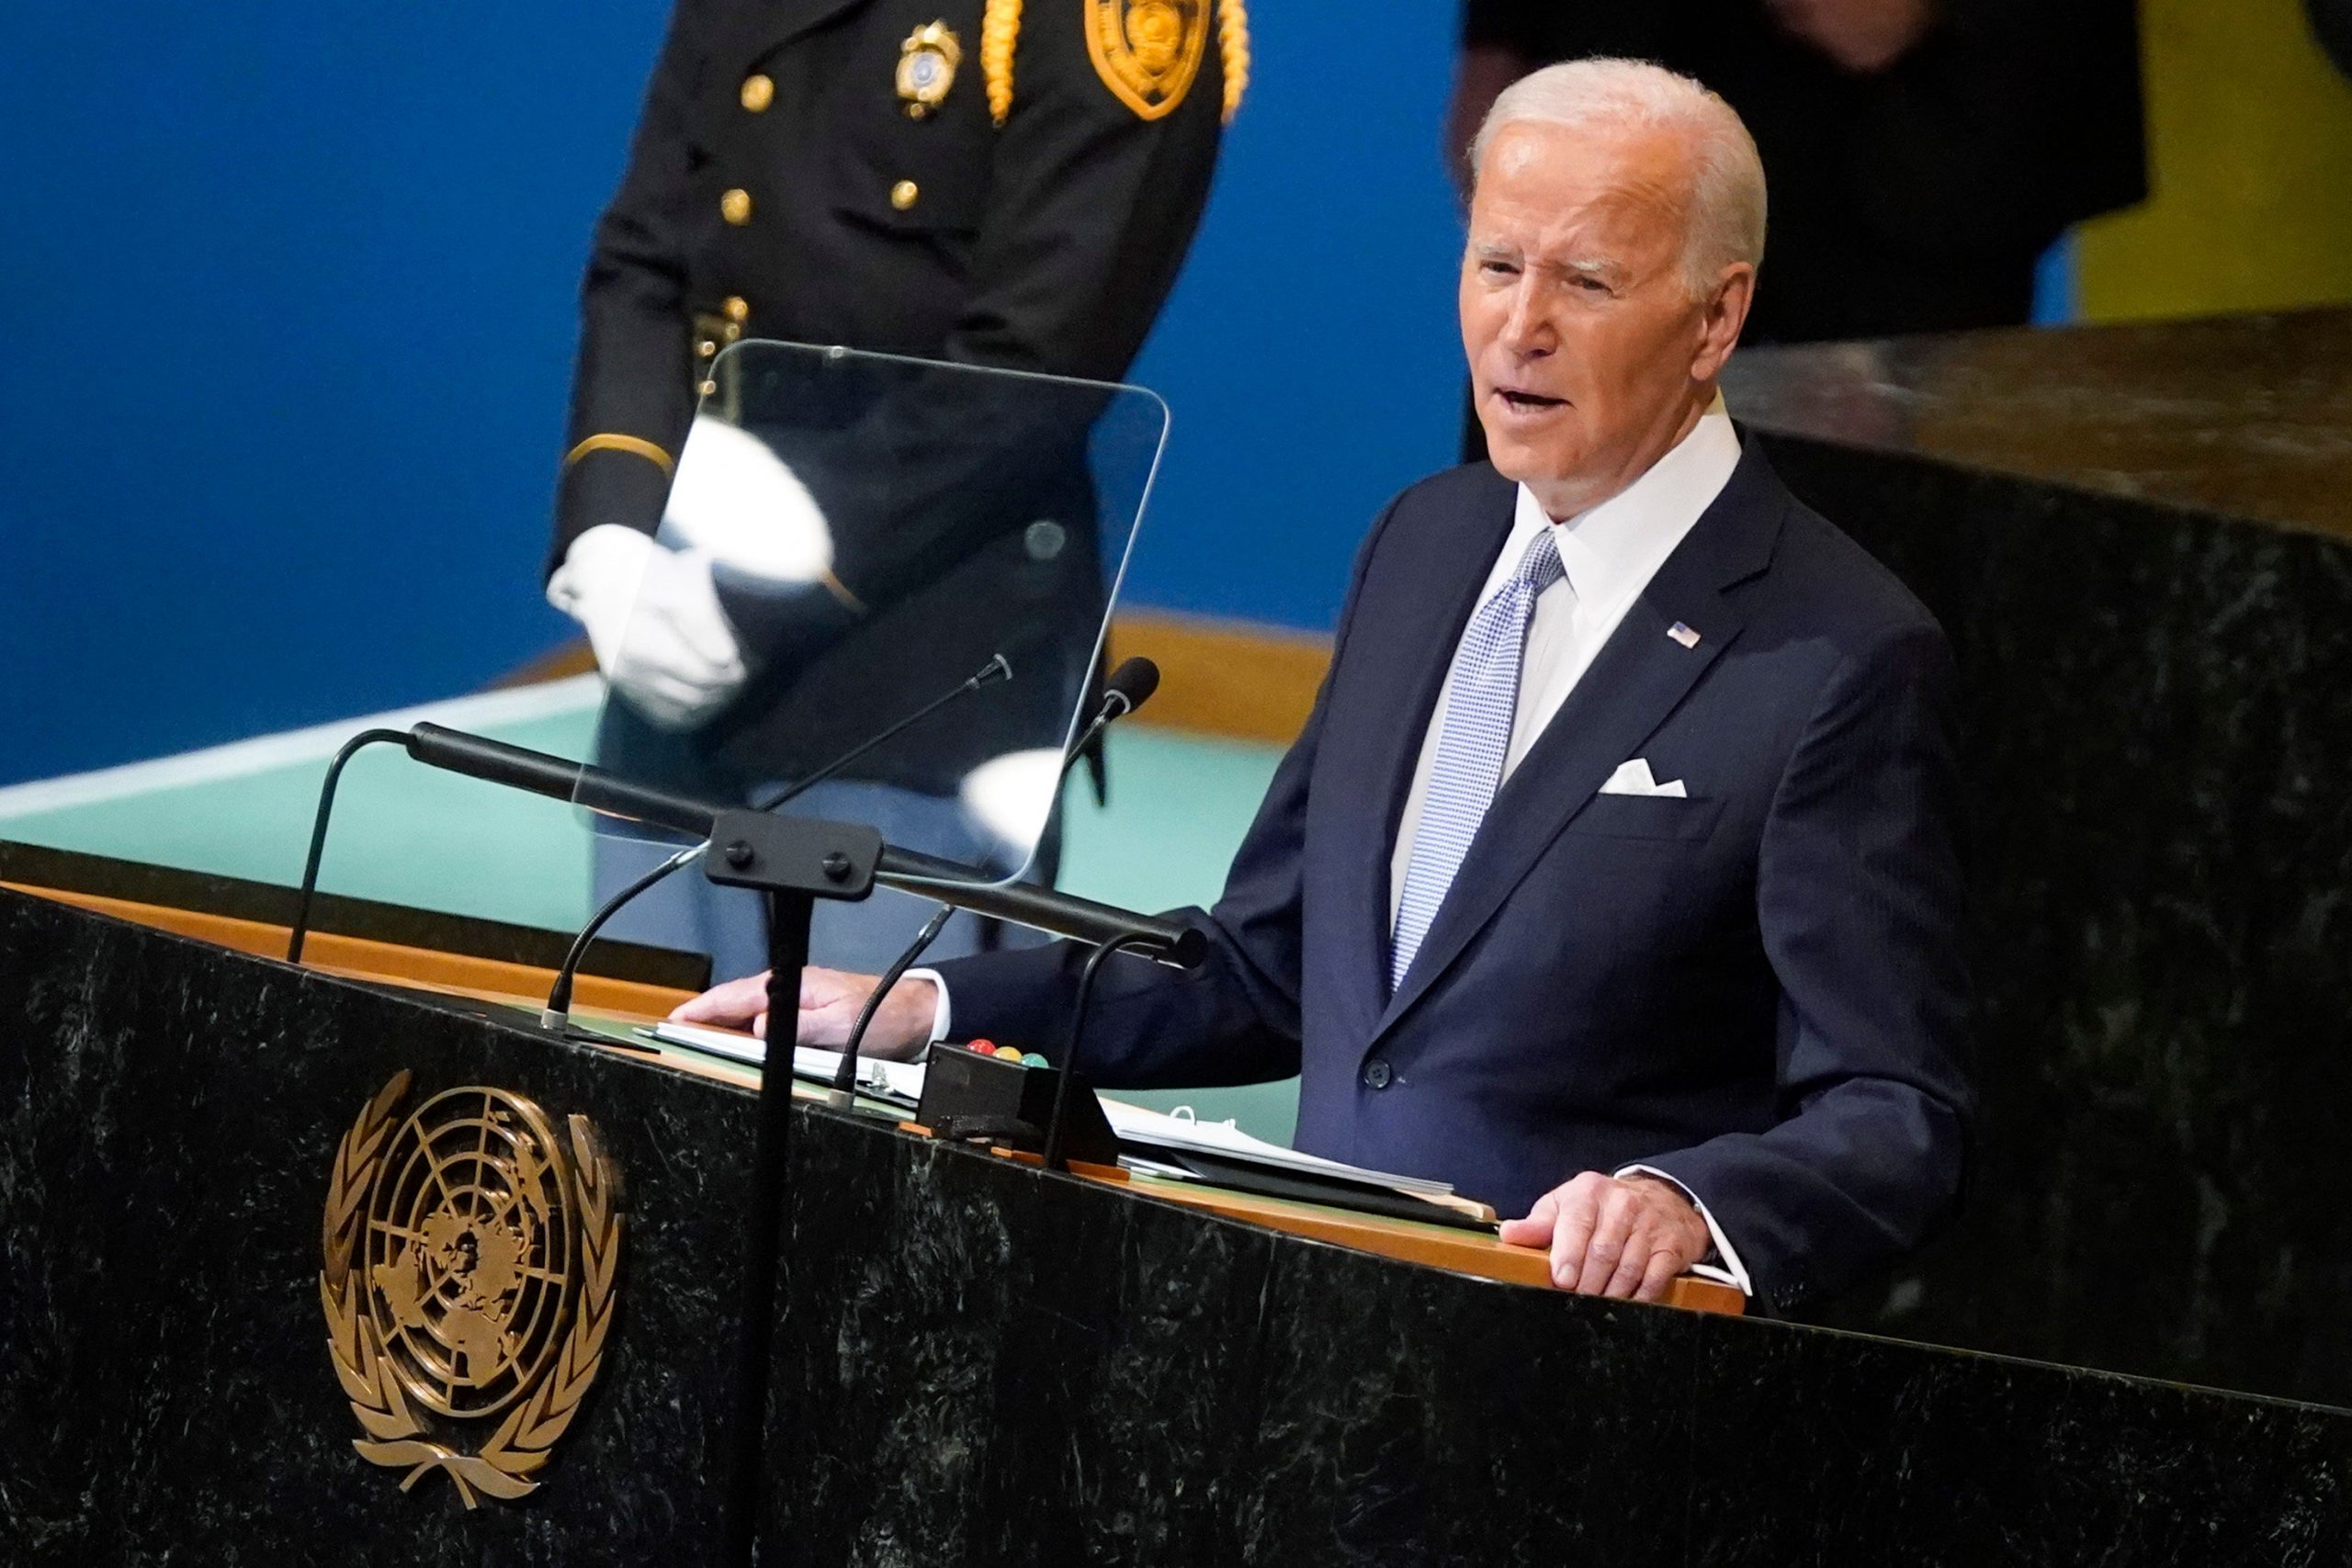 Joe Biden’s administration aims to end hunger in US by 2030